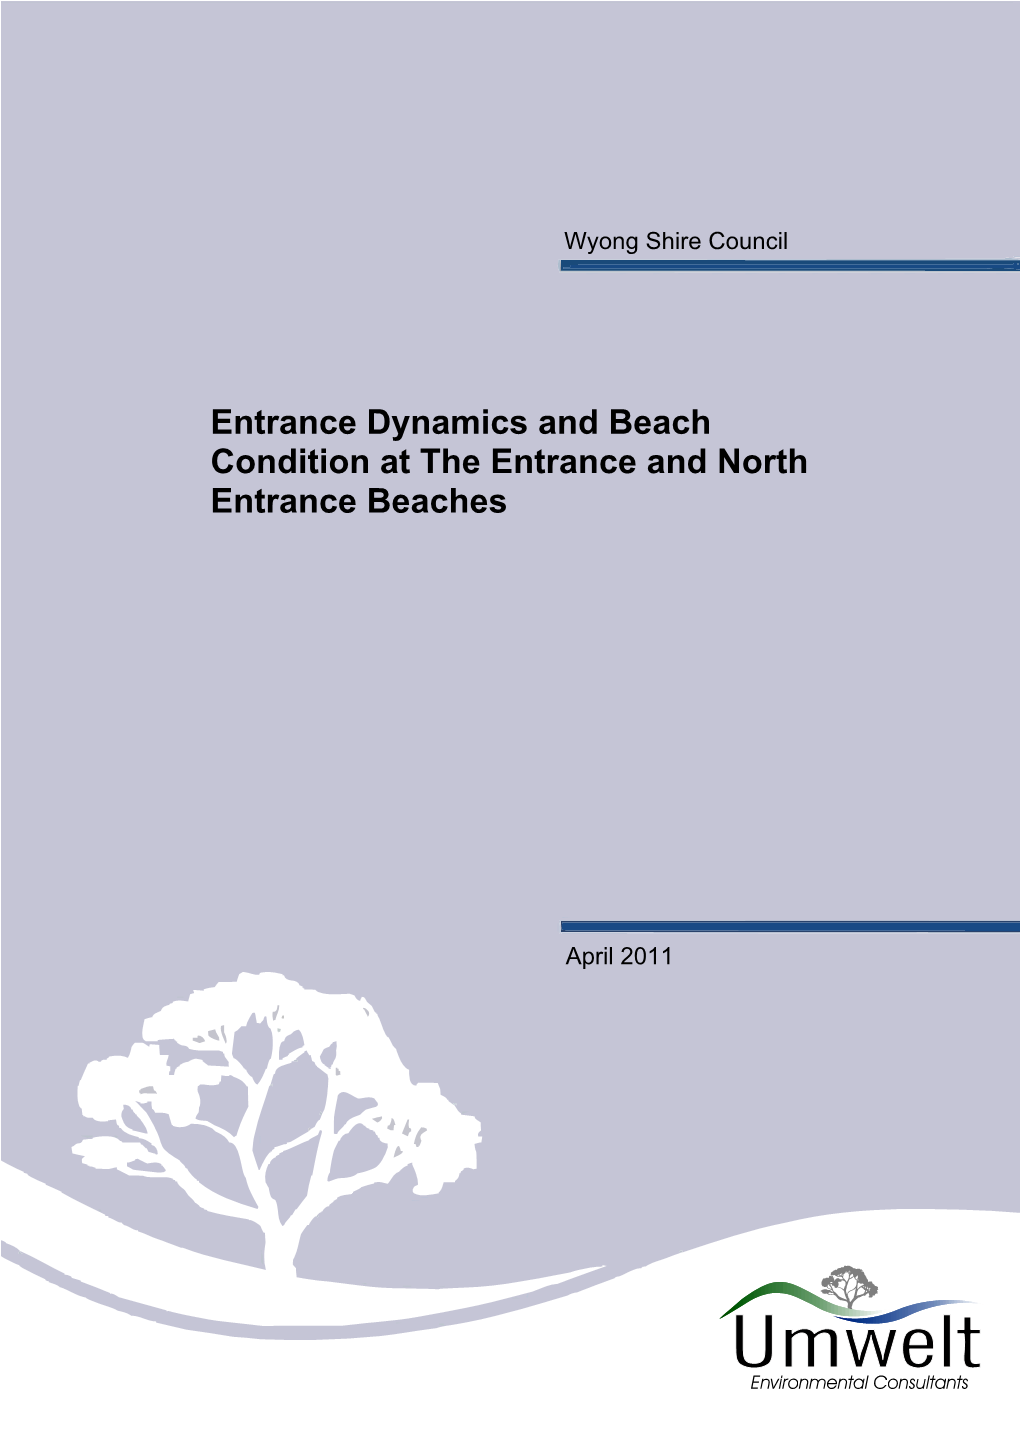 Entrance Dynamics and Beach Condition at the Entrance and North Entrance Beaches